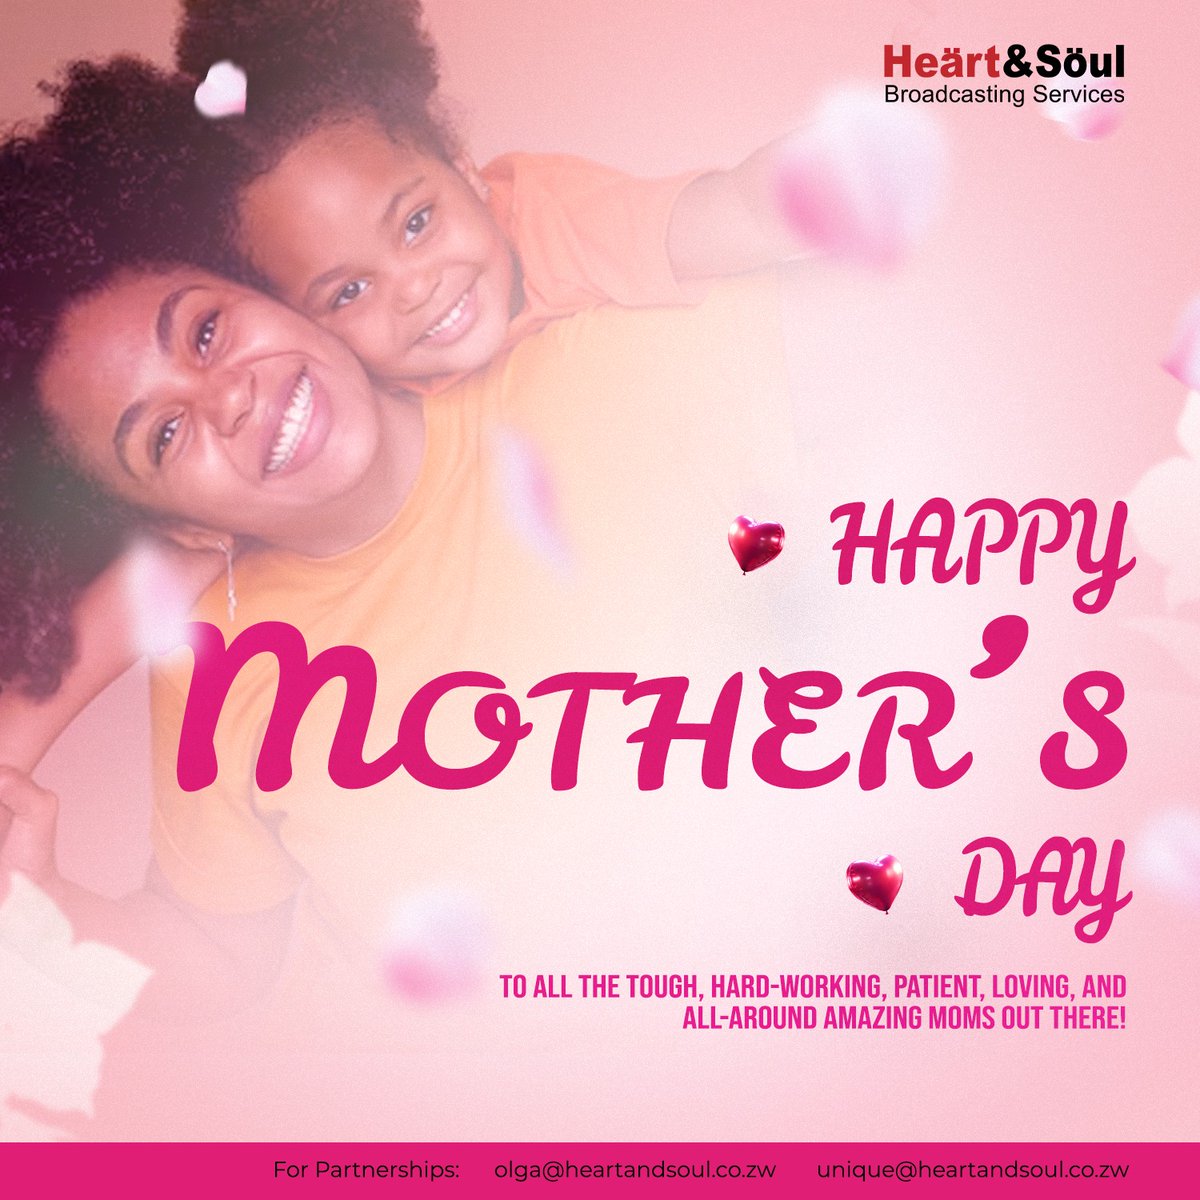 🔴Happy #MothersDay to all the incredible moms out there! 🔴We celebrate your endless love, strength, and sacrifices. You make the world a brighter place. ▶️What's your favorite memory with your mom? Share with us in the comments! #ThankYouMom